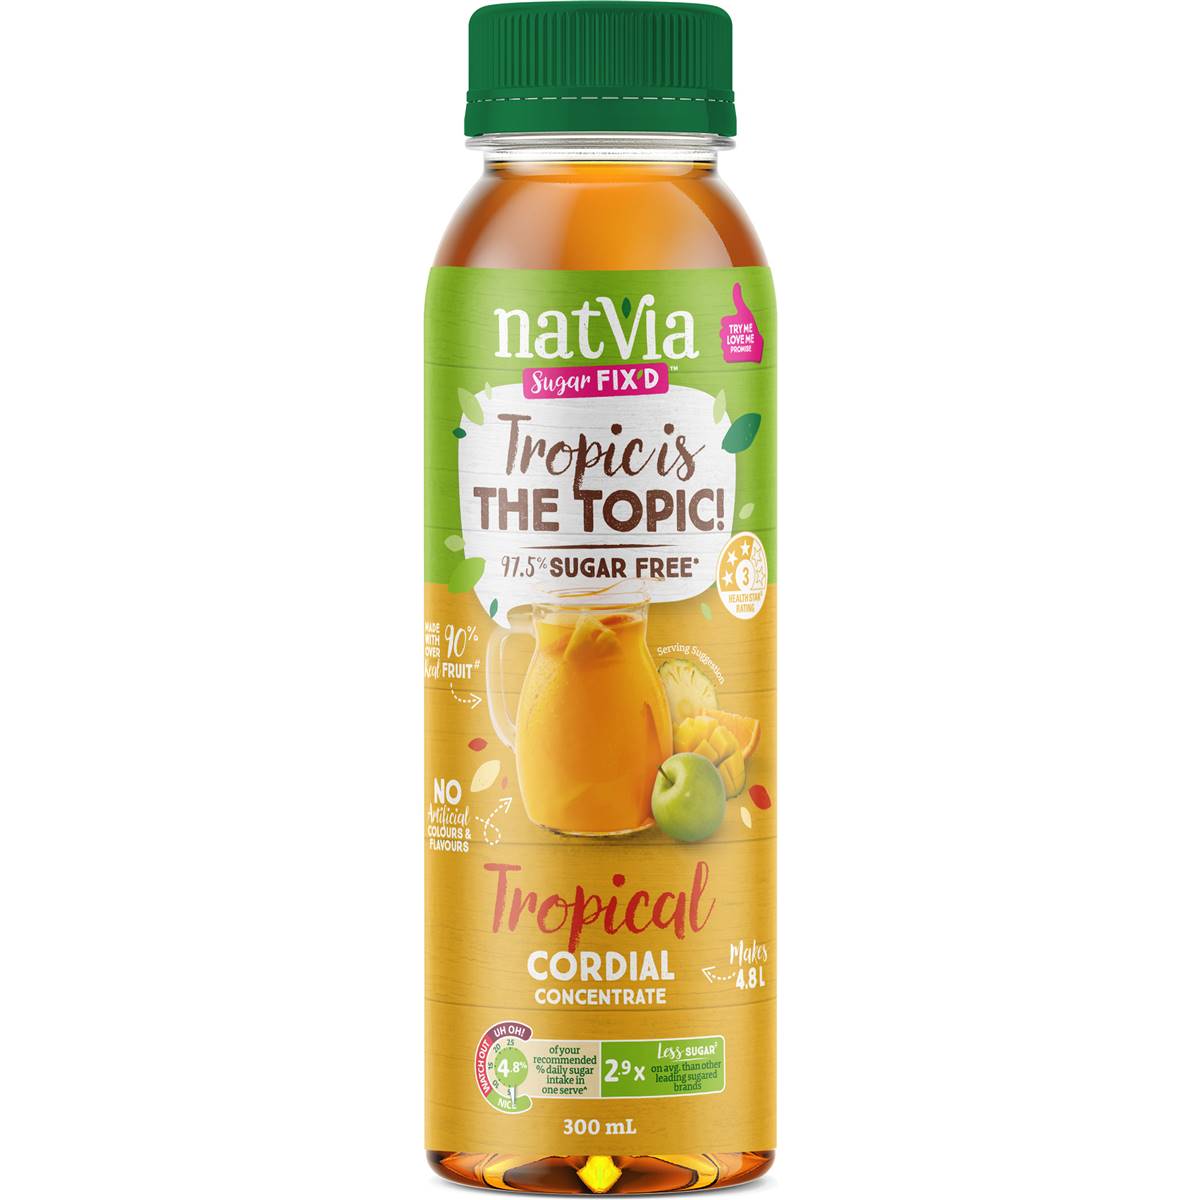 Calories in Natvia Tropical Paradise Cordial Concentrate 97% Sugar Free